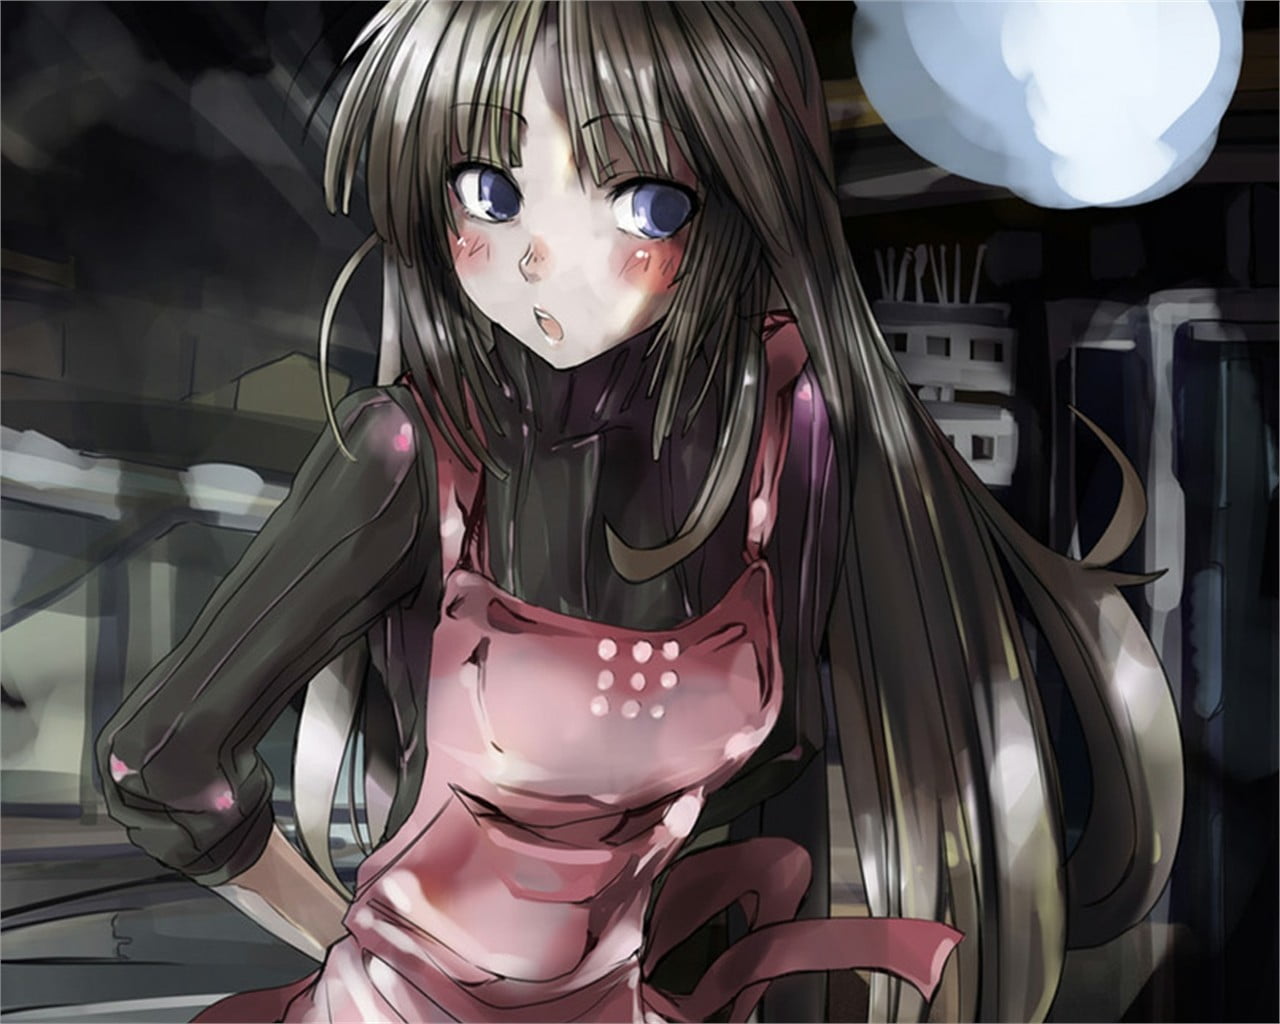 Clannad, anime girls, Sakagami Tomoyo, real people, one person